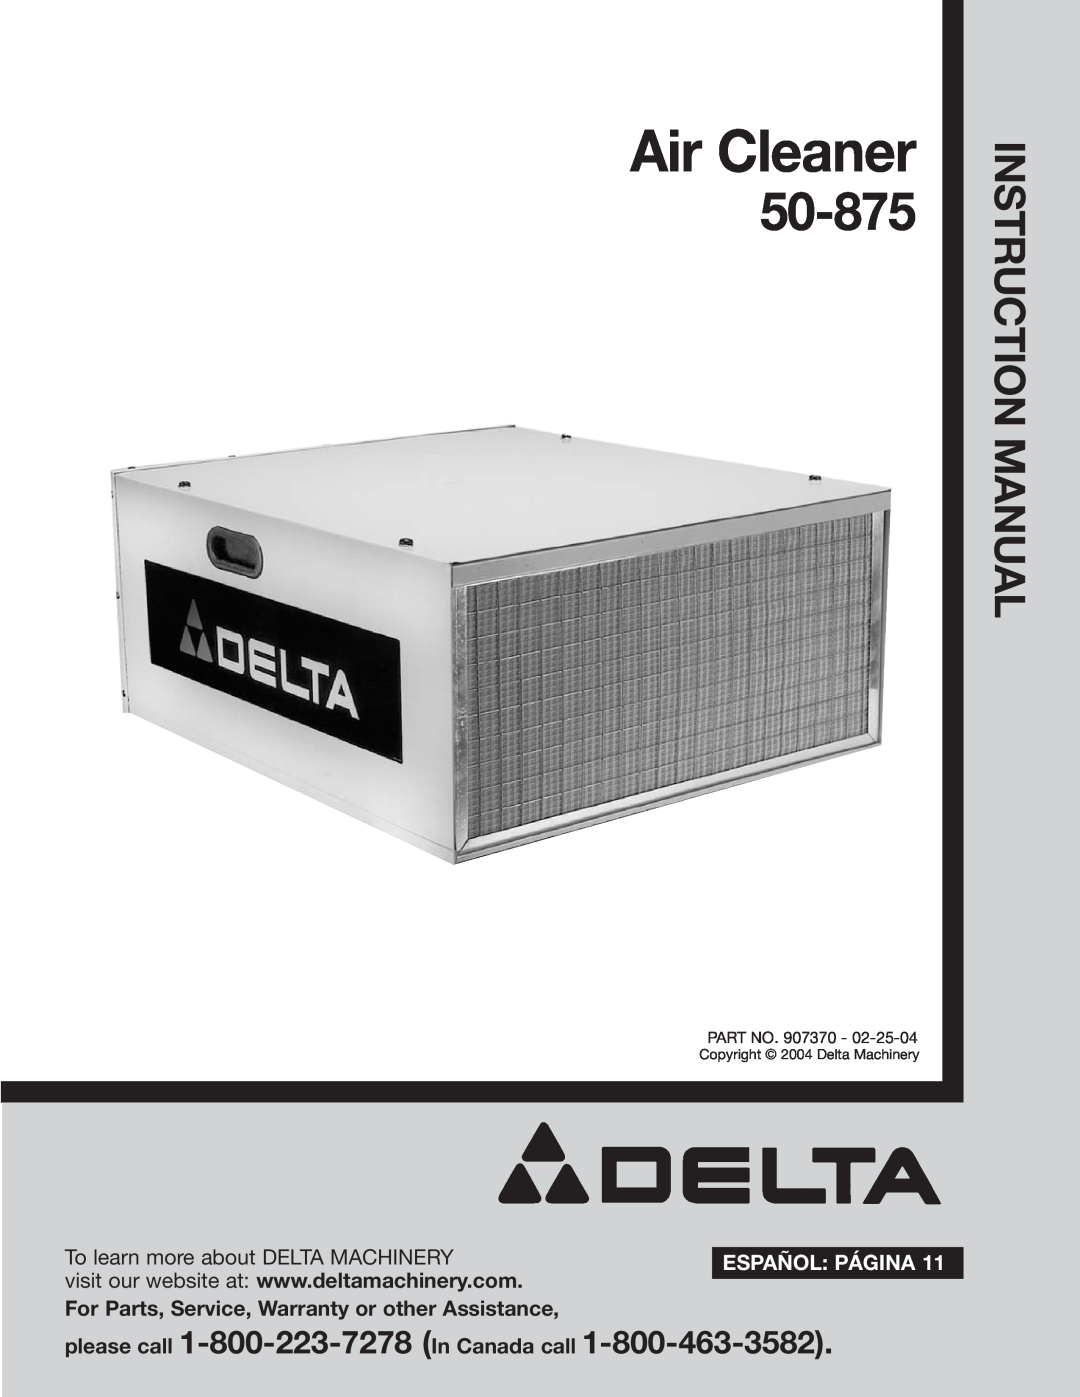 Delta 50-875 instruction manual For Parts, Service, Warranty or other Assistance, Air Cleaner, Español Página 